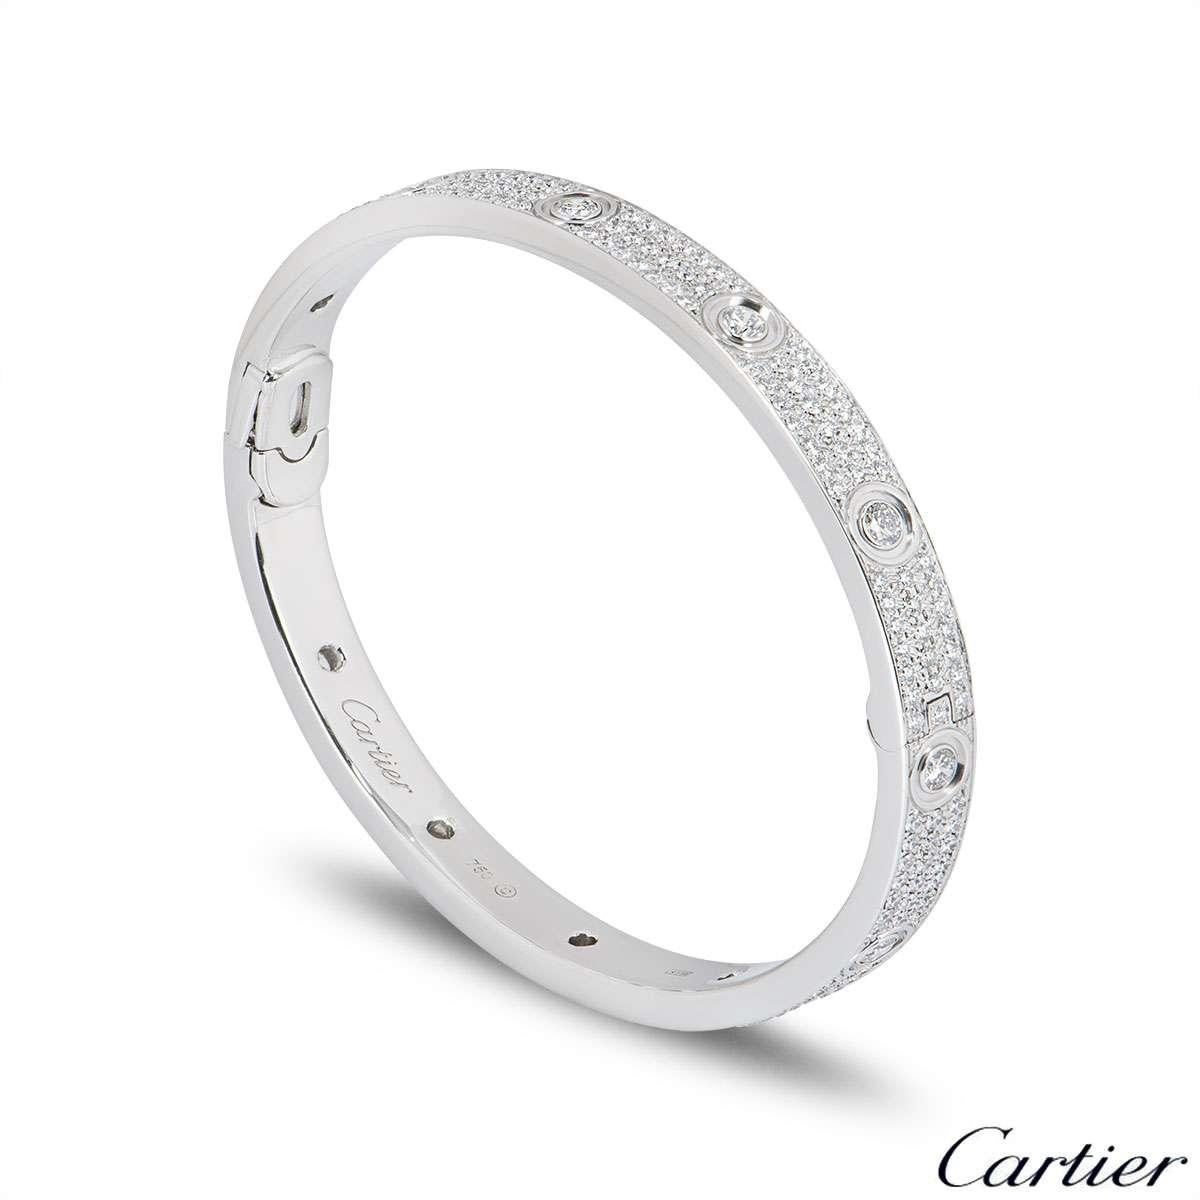 An exquisite 18k white gold Cartier diamond bracelet from the Love collection. The bracelet has 10 round brilliant cut diamonds around the outer edge in a rubover setting with 206 round brilliant cut diamonds pave set between each larger diamond.